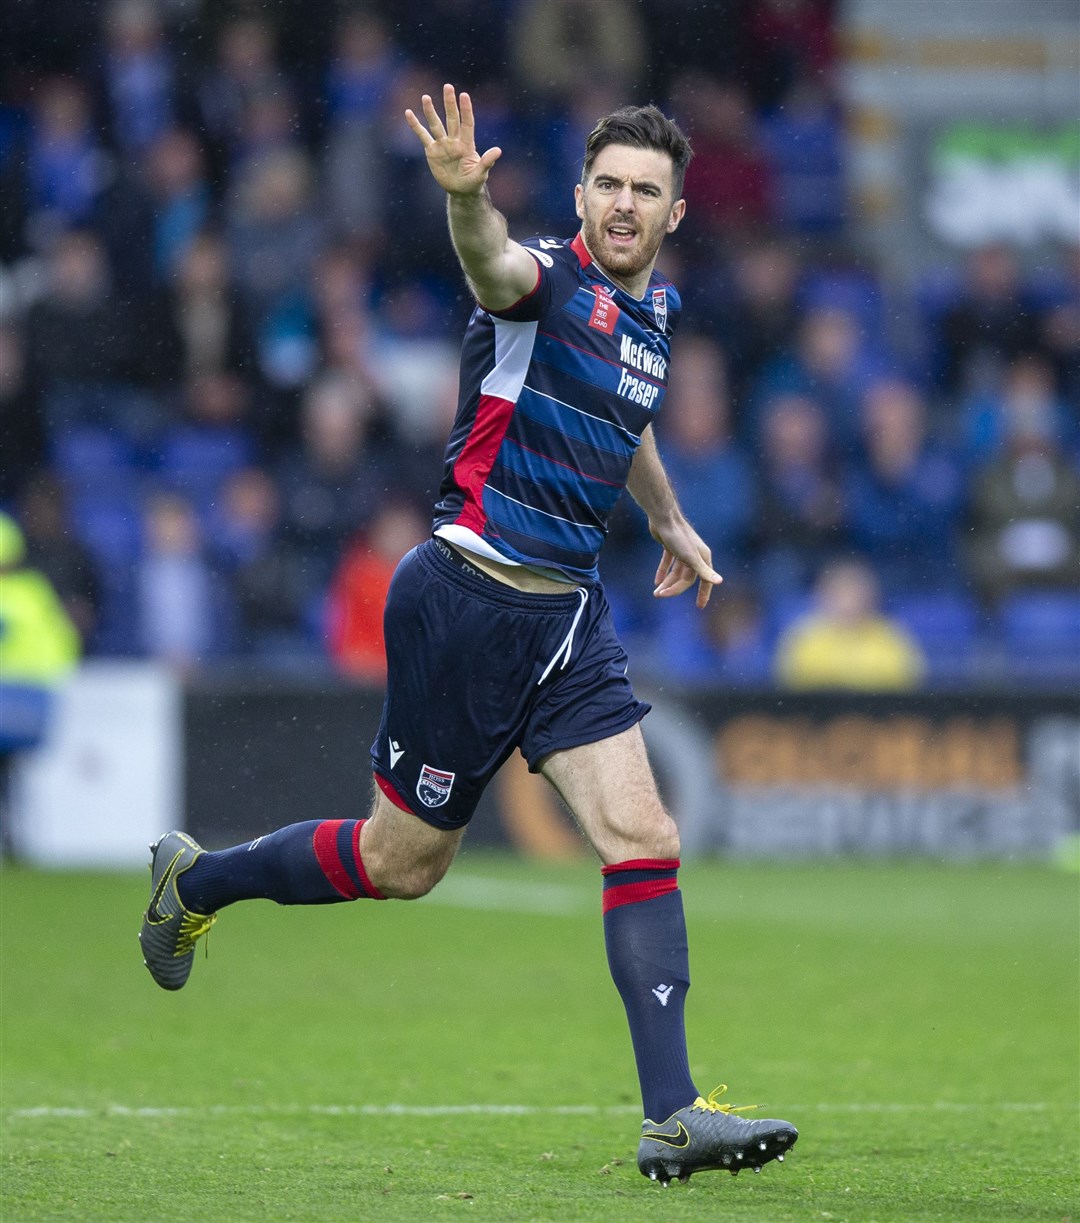 Picture - Ken Macpherson, Inverness. Ross County(2) v St.Johnstone(2). 05.10.19. Ross County's Ross Draper makes his return from an injury lay-off.